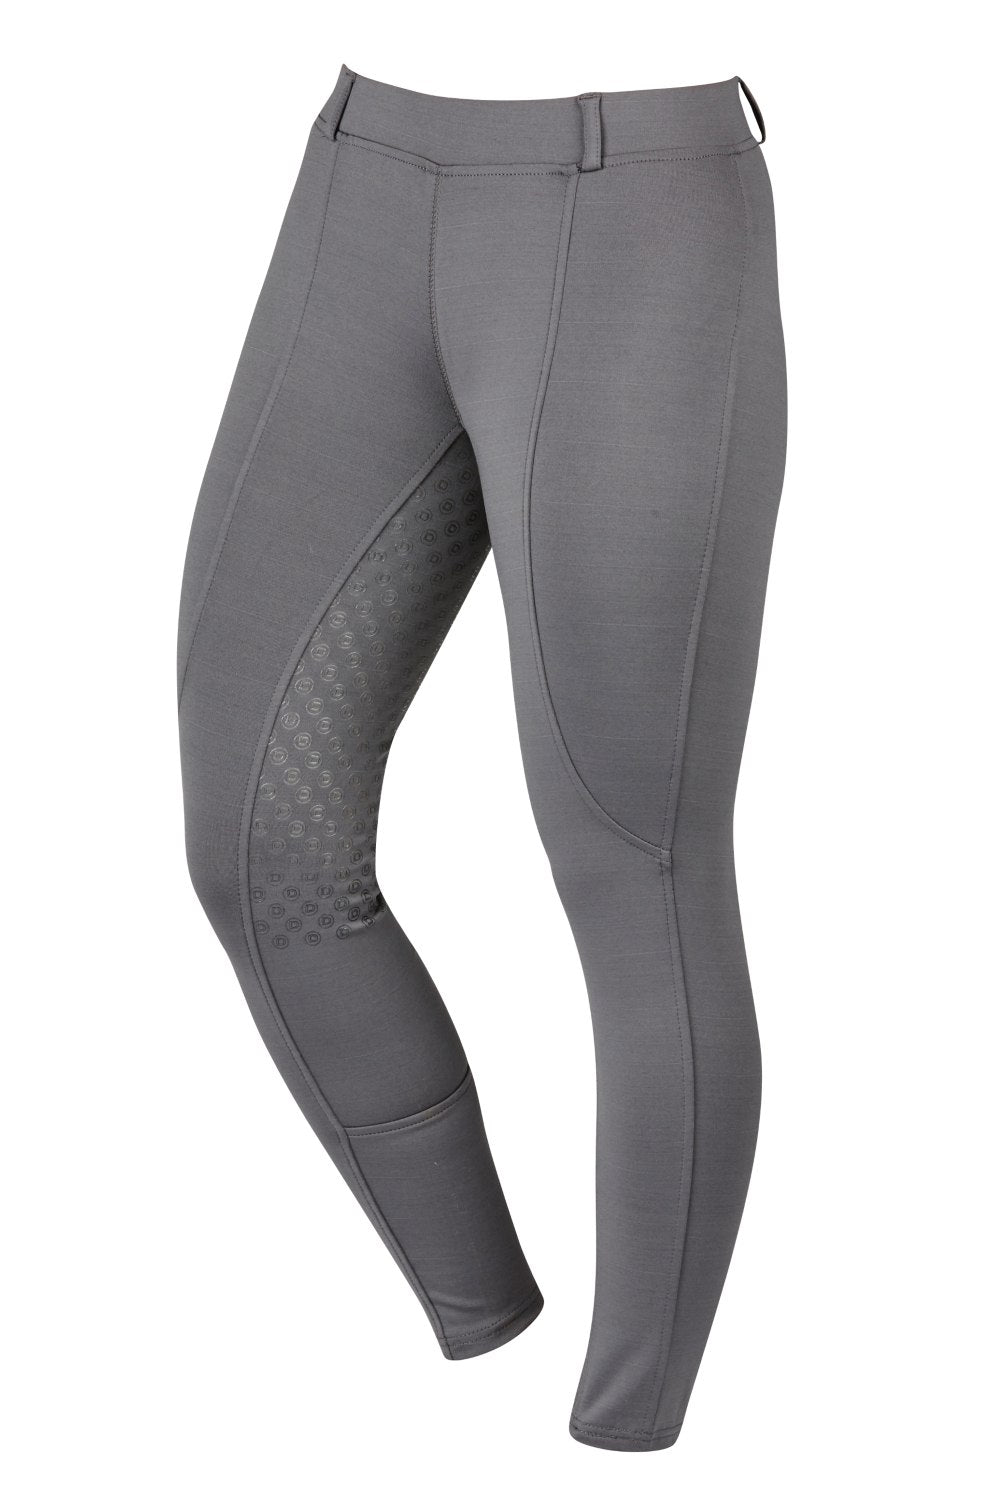 Dublin Performance Cool-It Gel Riding Tights in Charcoal 